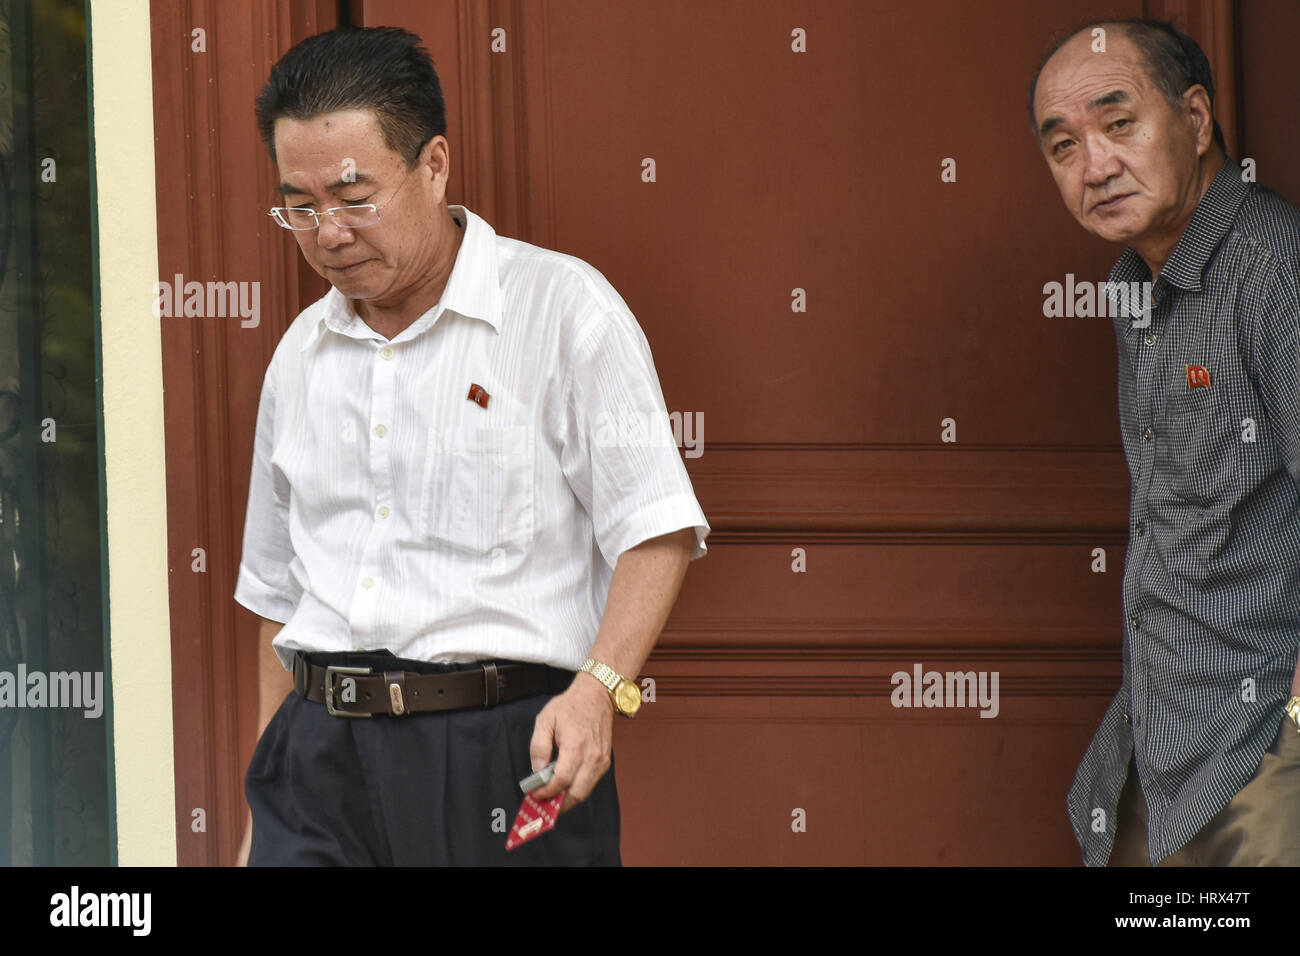 Kuala Lumpur, MALAYSIA. 5th Mar, 2017. North Korean Embassy counsellor Kim Yu Song(L) and unidentify man(R) step out from the North Korea Embassy in Kuala Lumpur, Malaysia on March 05, 2017 at Kuala Lumpur, Malaysia. North Korean Ambassador Kang Chol has accused Malaysia of colluding with foreign powers in the murder of Kim Jong-nam, must leave the country within 48 hours. Credit: Chris Jung/ZUMA Wire/Alamy Live News Stock Photo